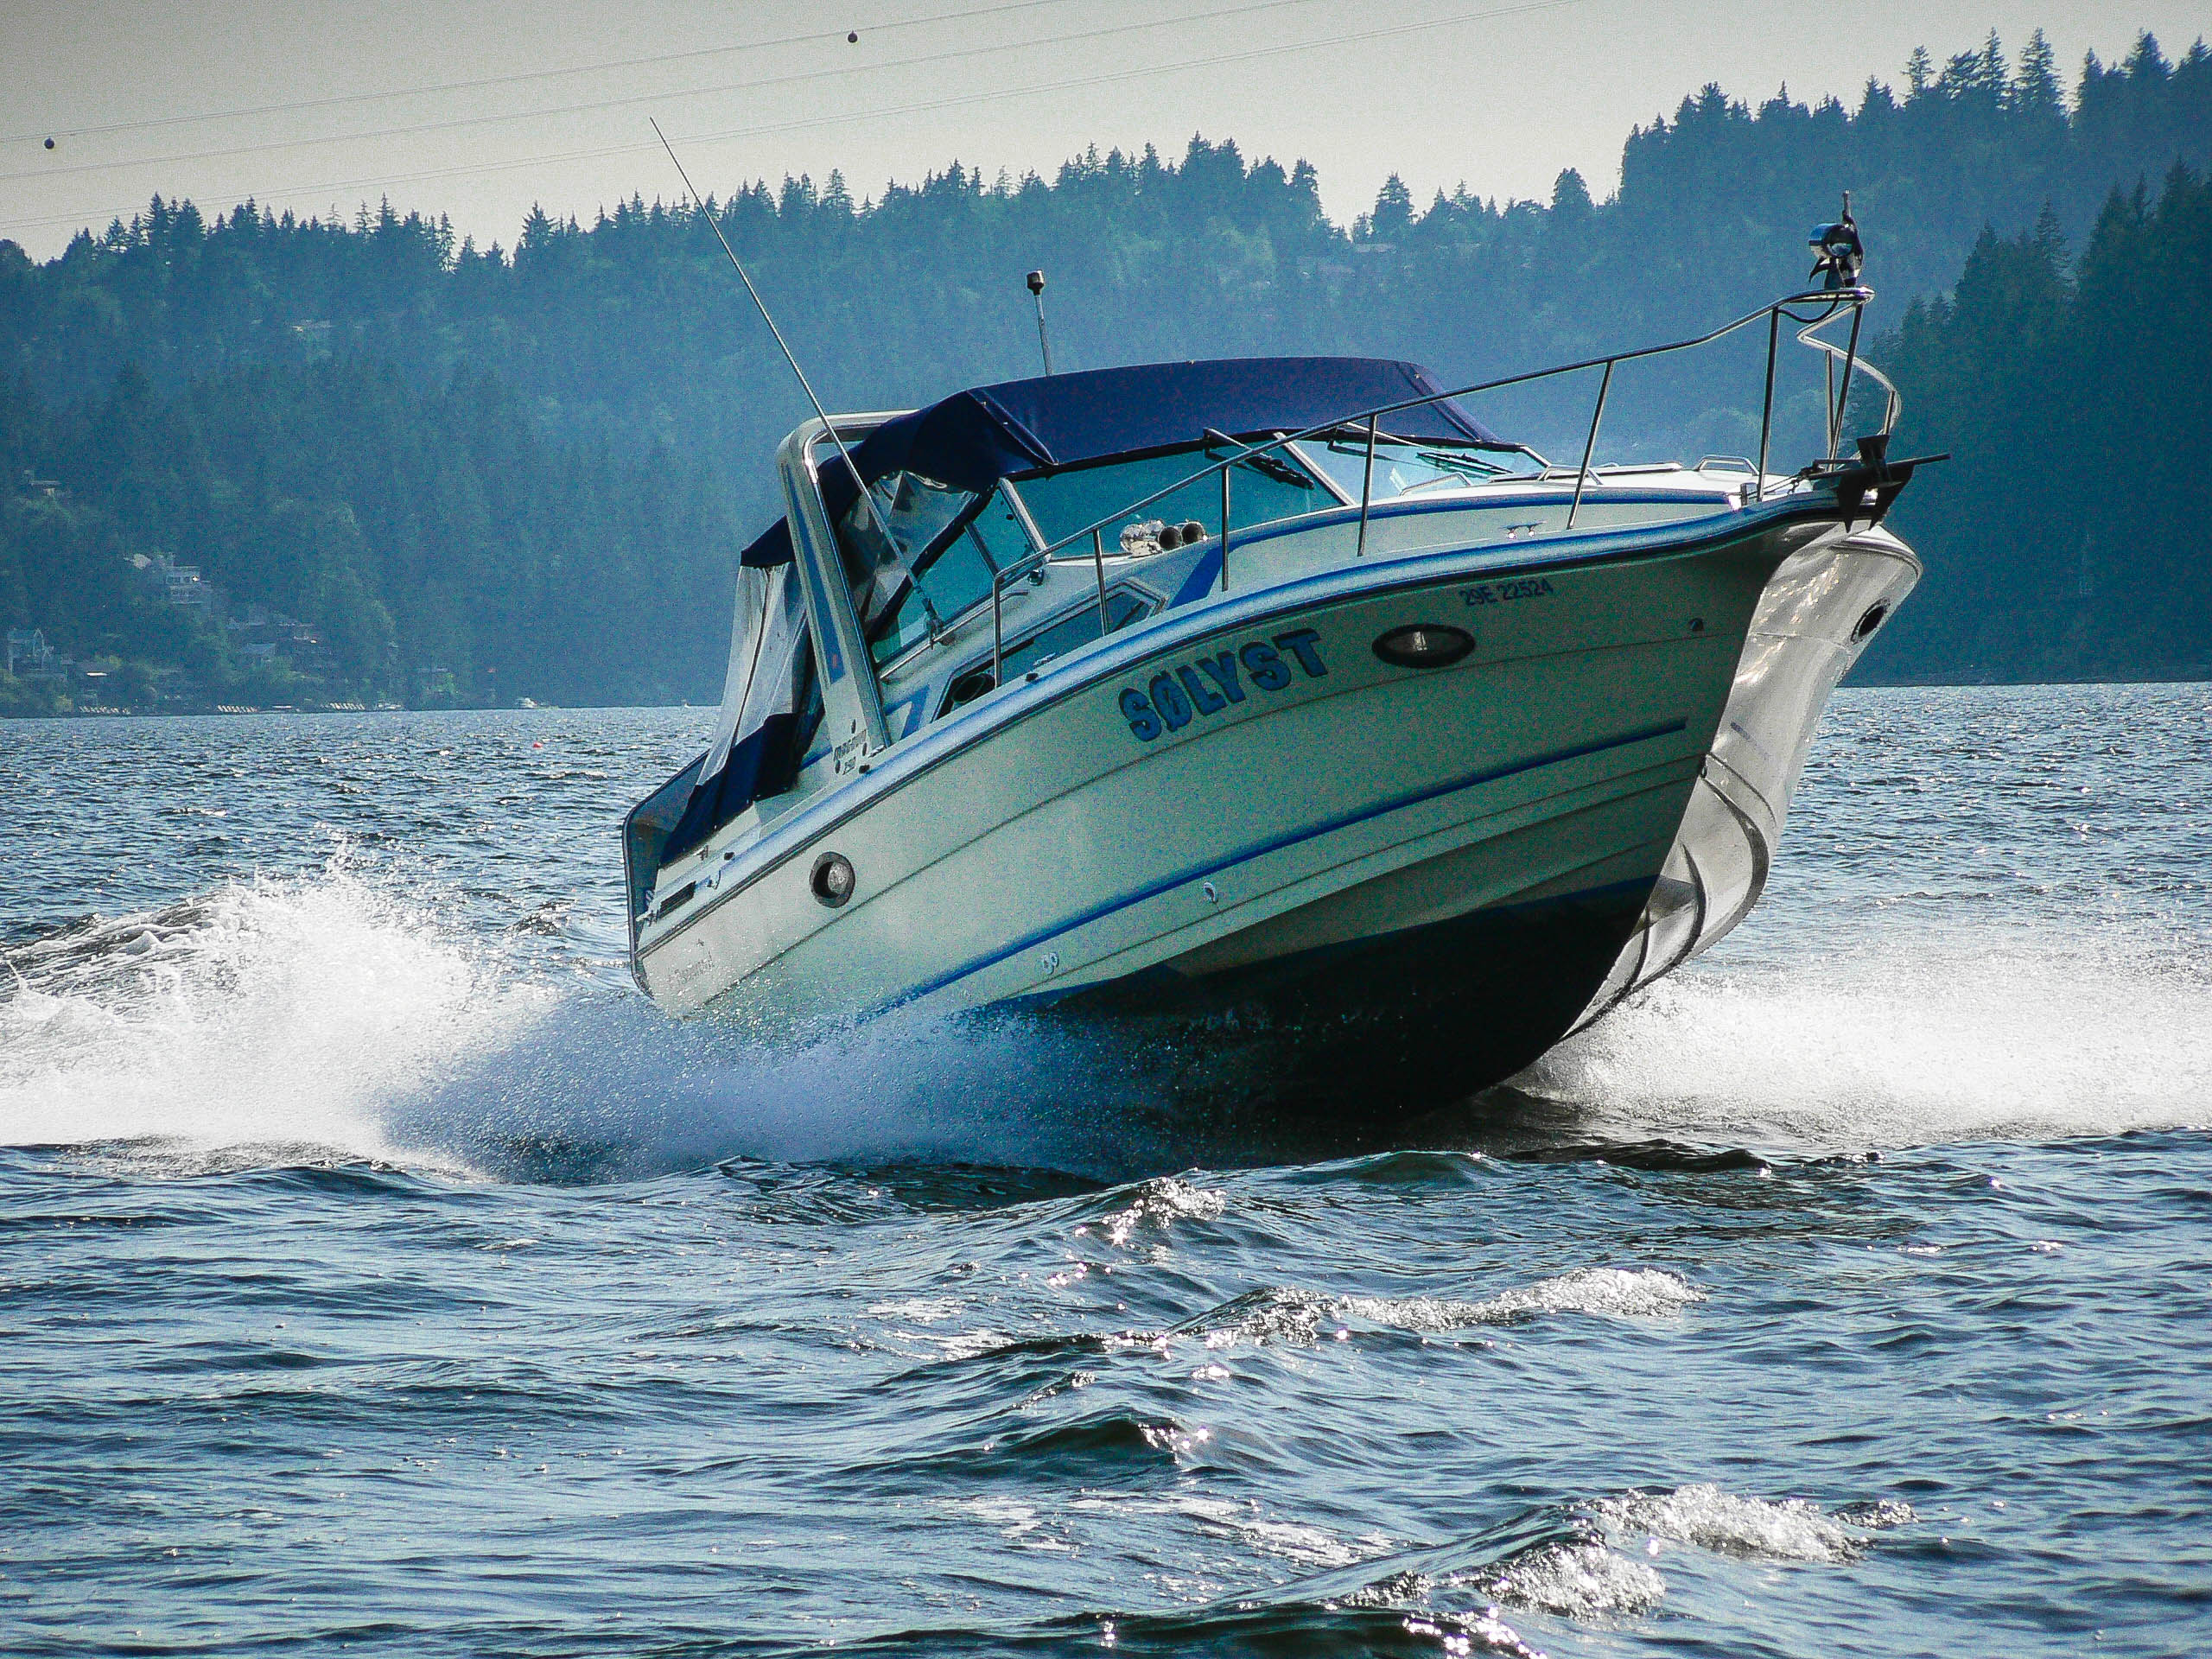 Discover the Magic of Boating at the Vancouver International Boat Show